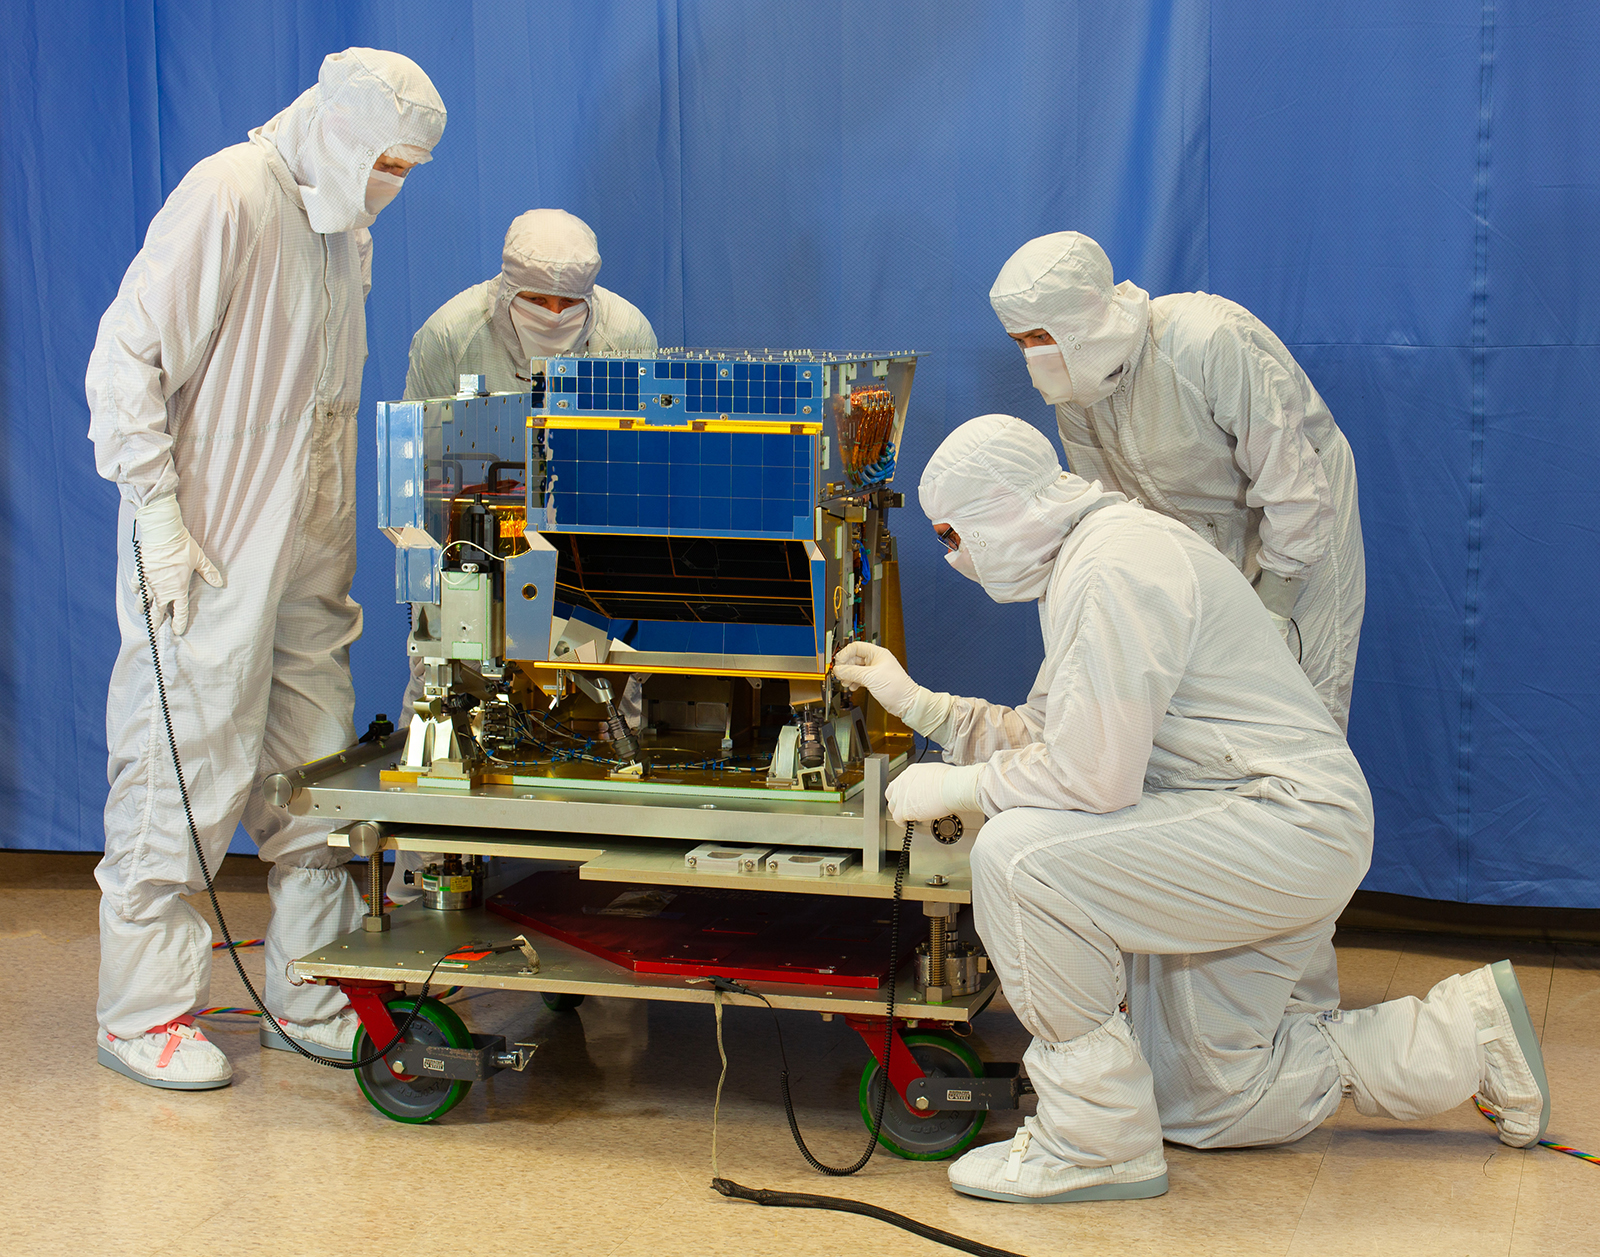 Four technicians in white cleanroom suits, masks and hoods gather around the CrIS instrument on a wheeled cart. The instrument is about the size of a large microwave. The technician in the front on the right kneels and adjusts a small piece of the instrument.